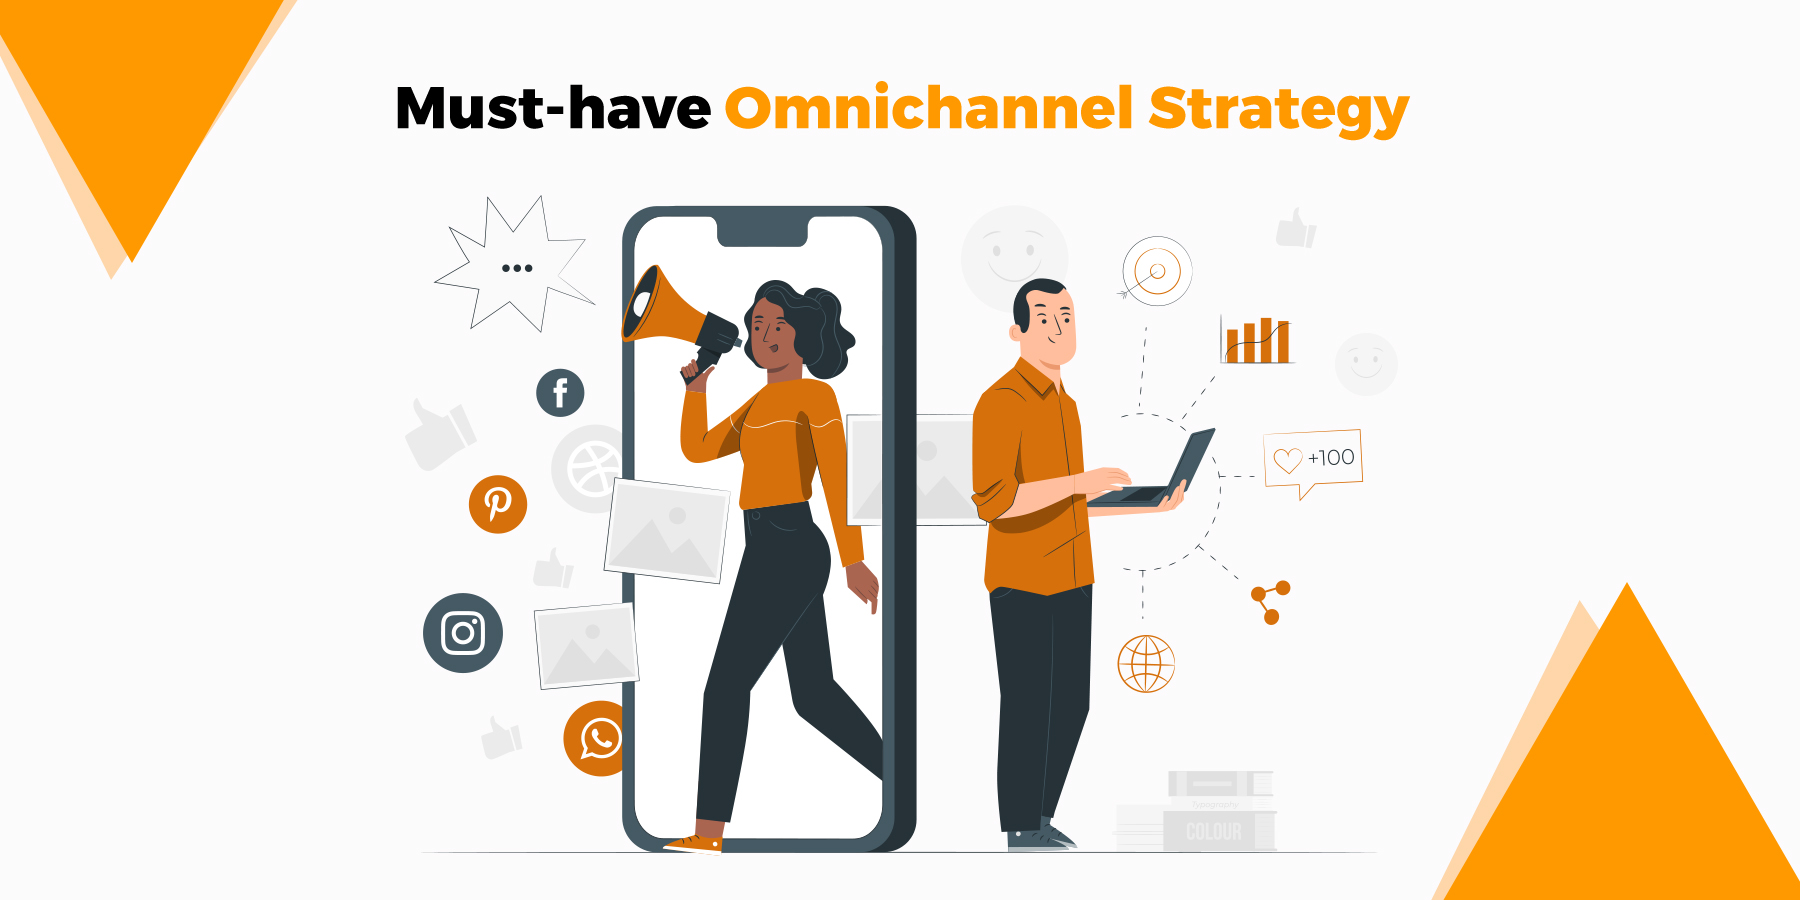 What Is Omnichannel Strategy